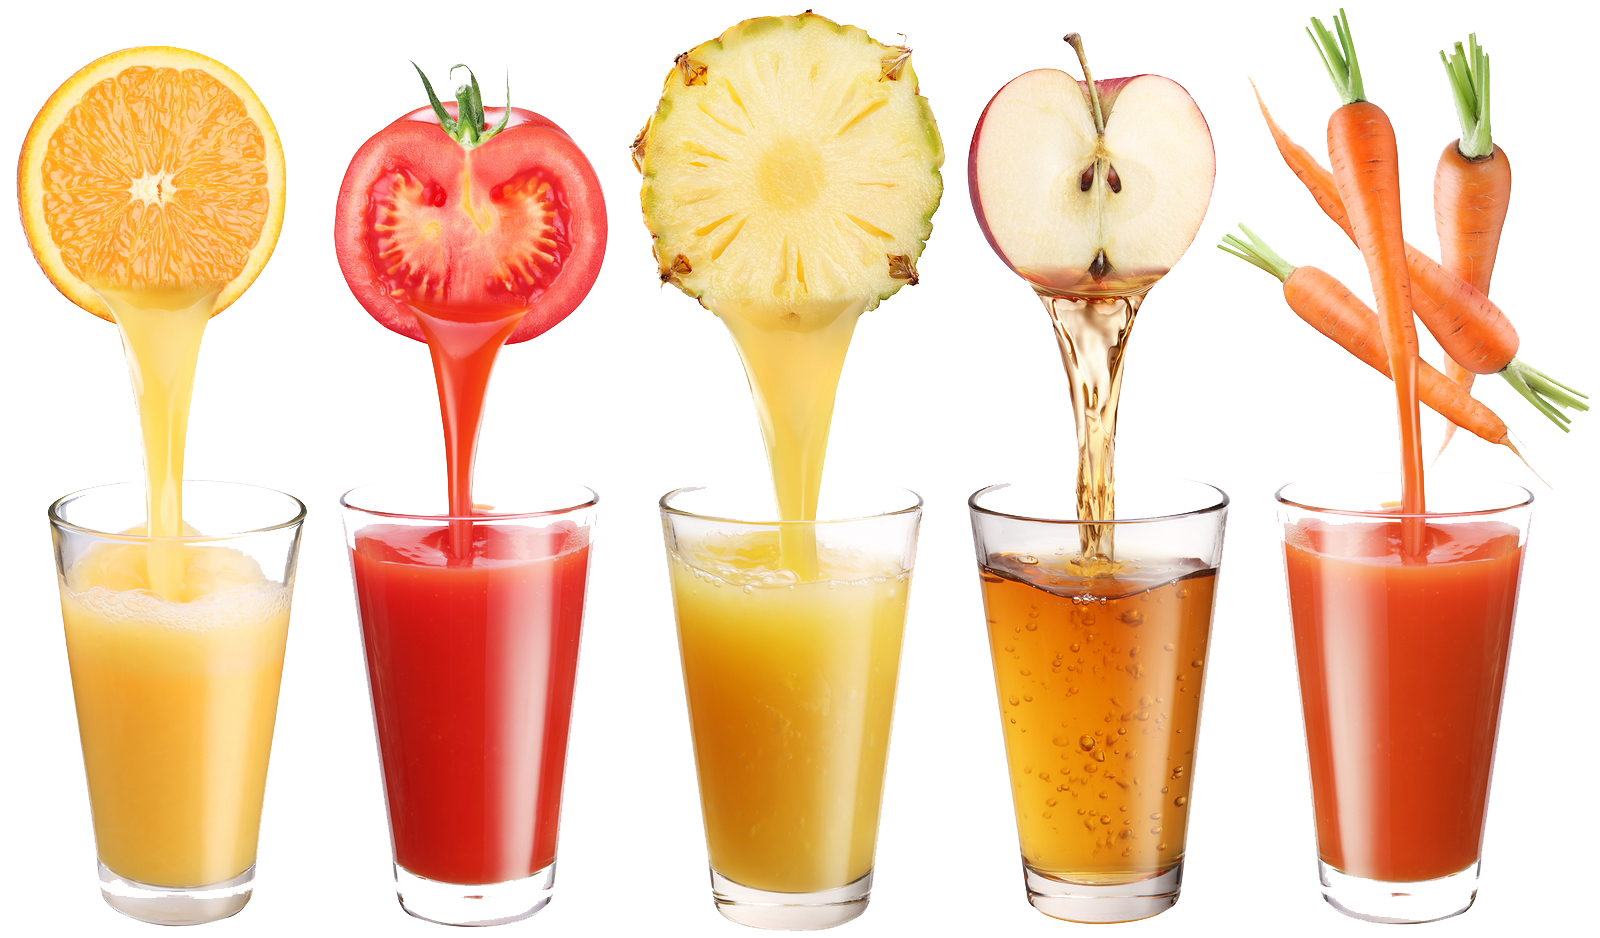 Free Juice Png Transparent Images Download Free Juice Png Transparent Images Png Images Free Cliparts On Clipart Library